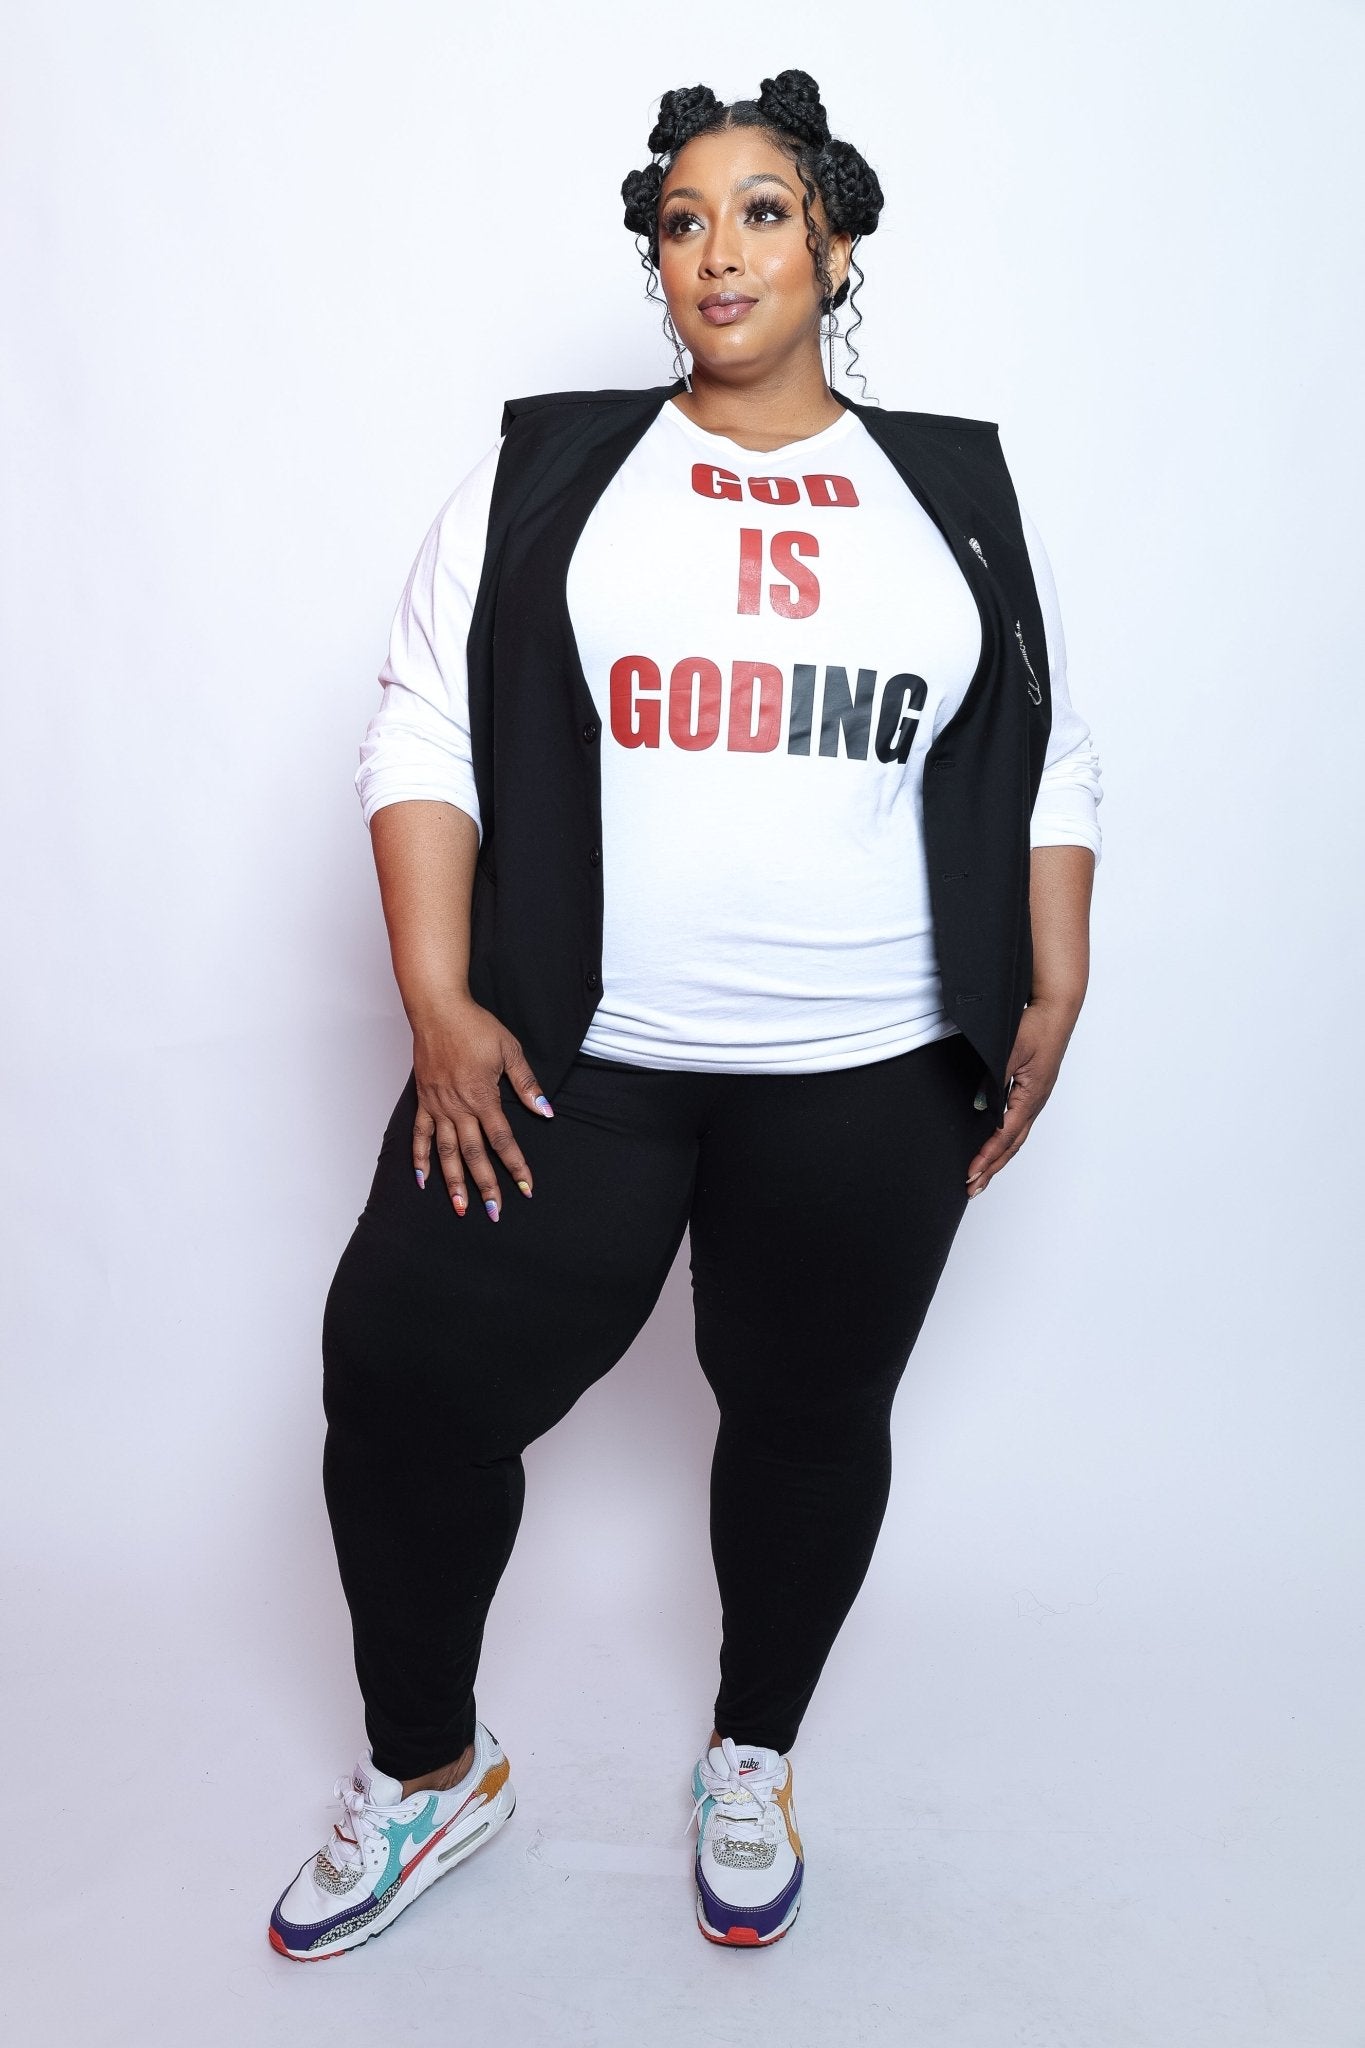 Women's God is GODing Tee/Hoodie - House of FaSHUN by Shun Melson